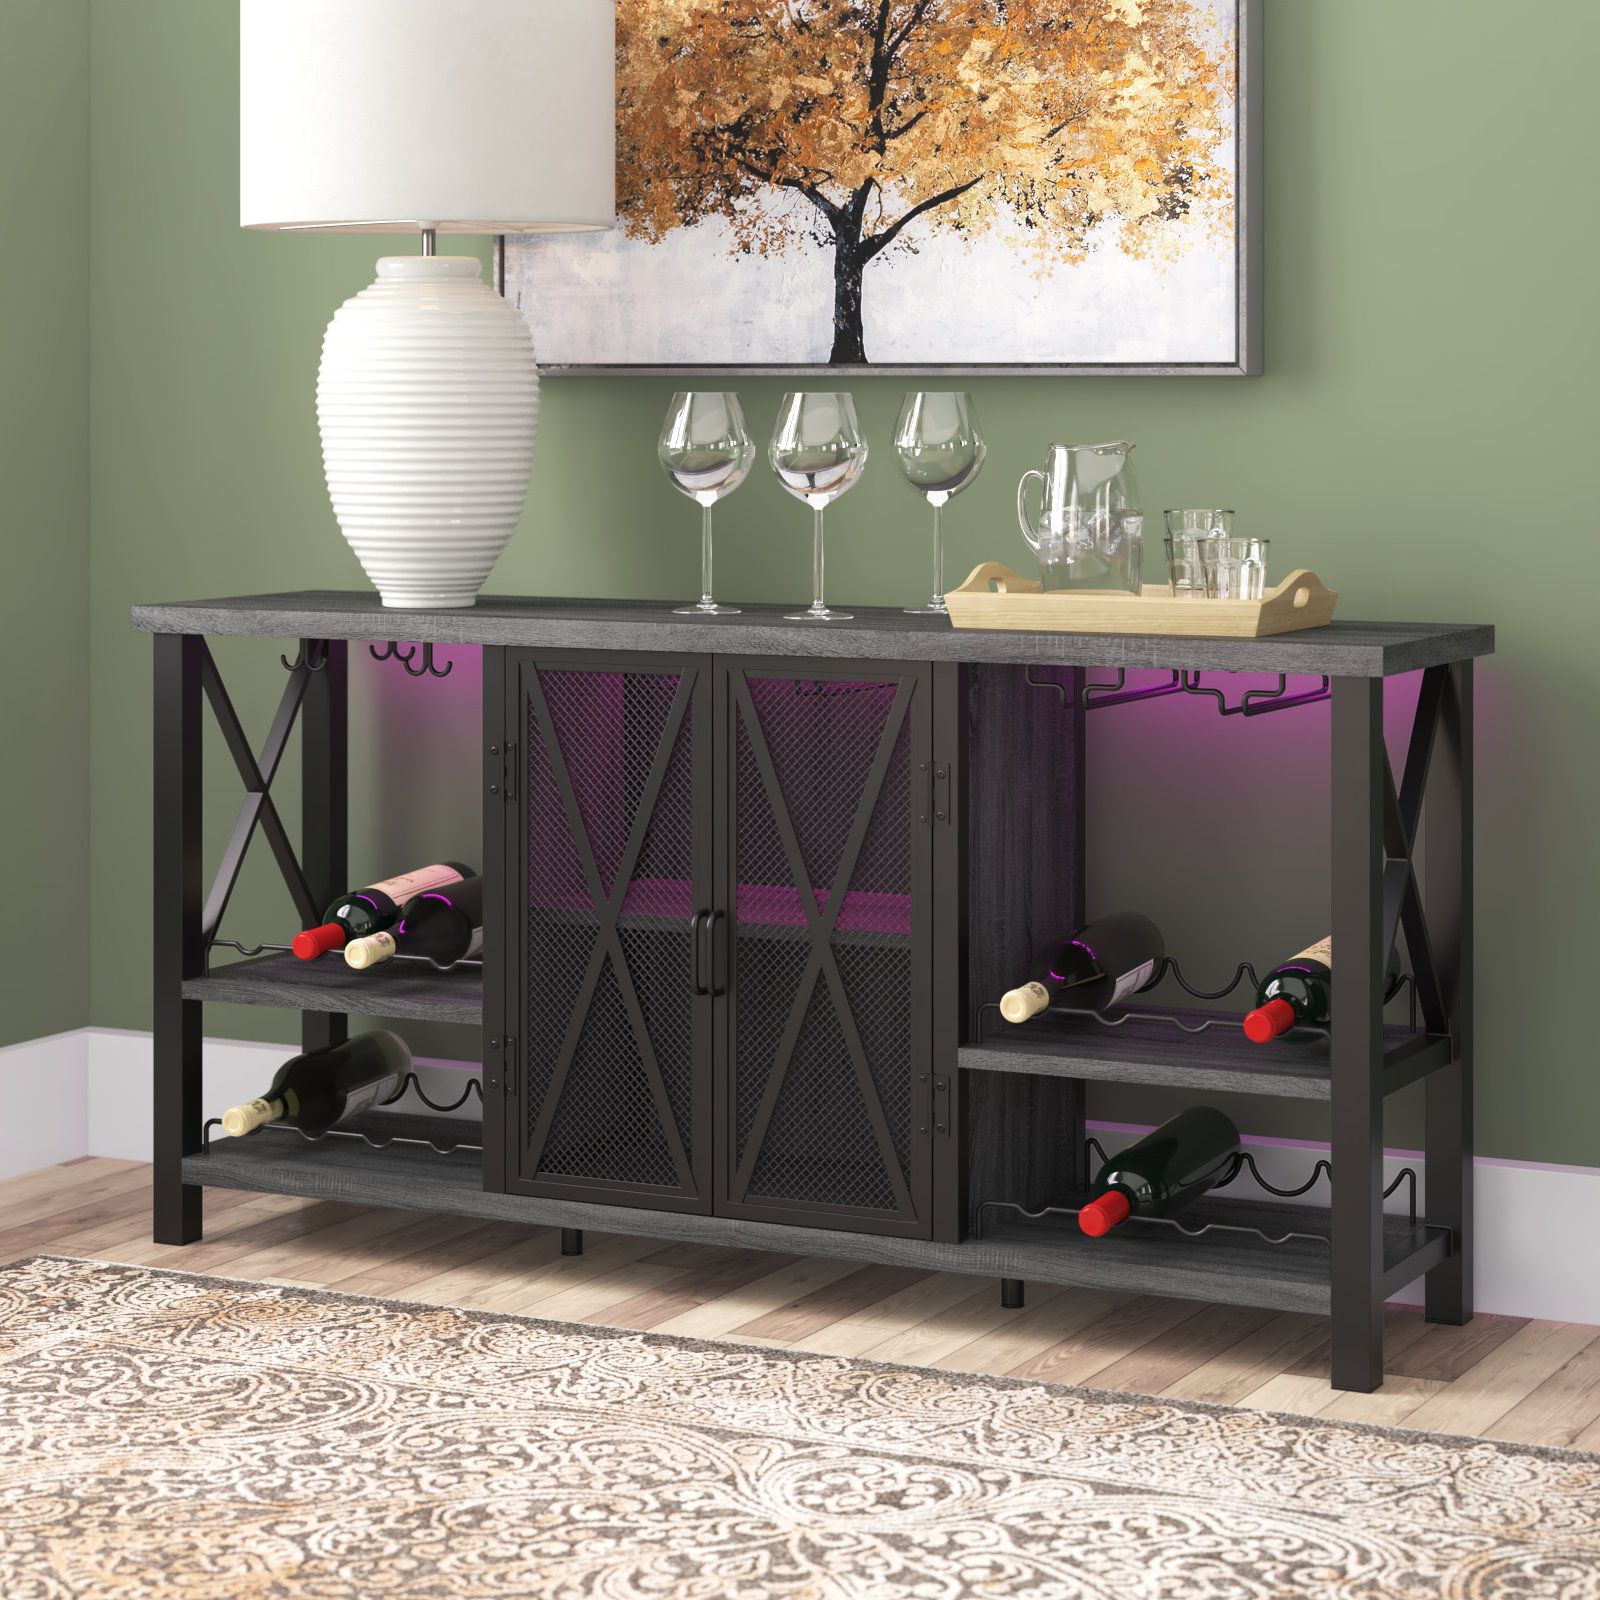 Sideboards With Breathable Mesh Doors Within Most Current Wade Logan® Sideboard With Led Light And Wine Cabinet & Reviews (View 10 of 10)